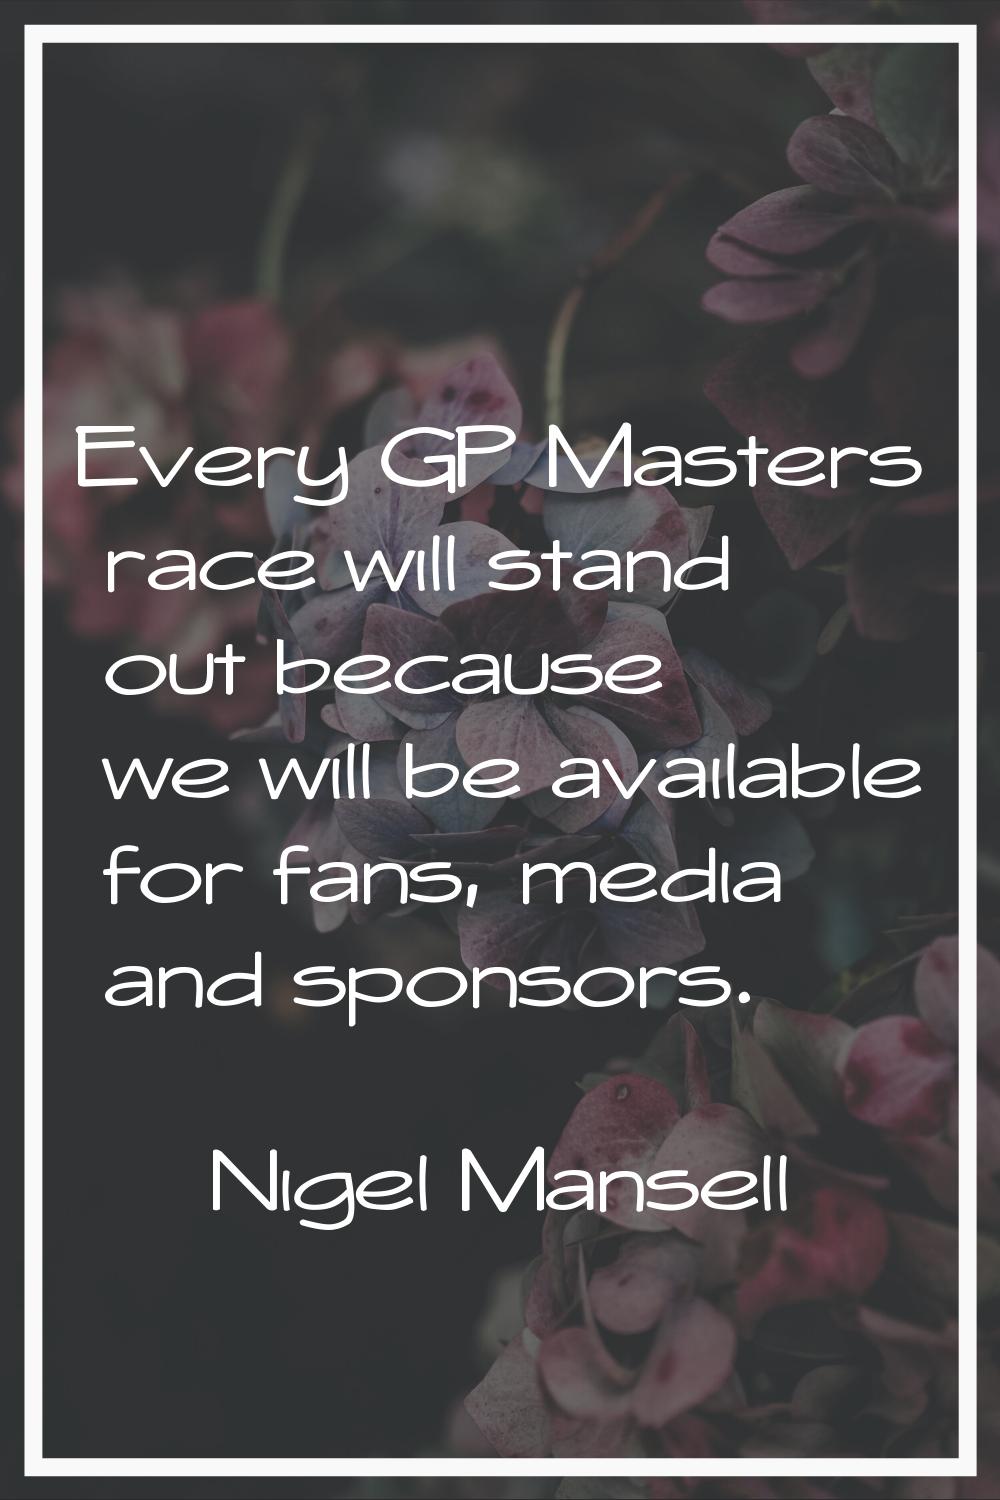 Every GP Masters race will stand out because we will be available for fans, media and sponsors.